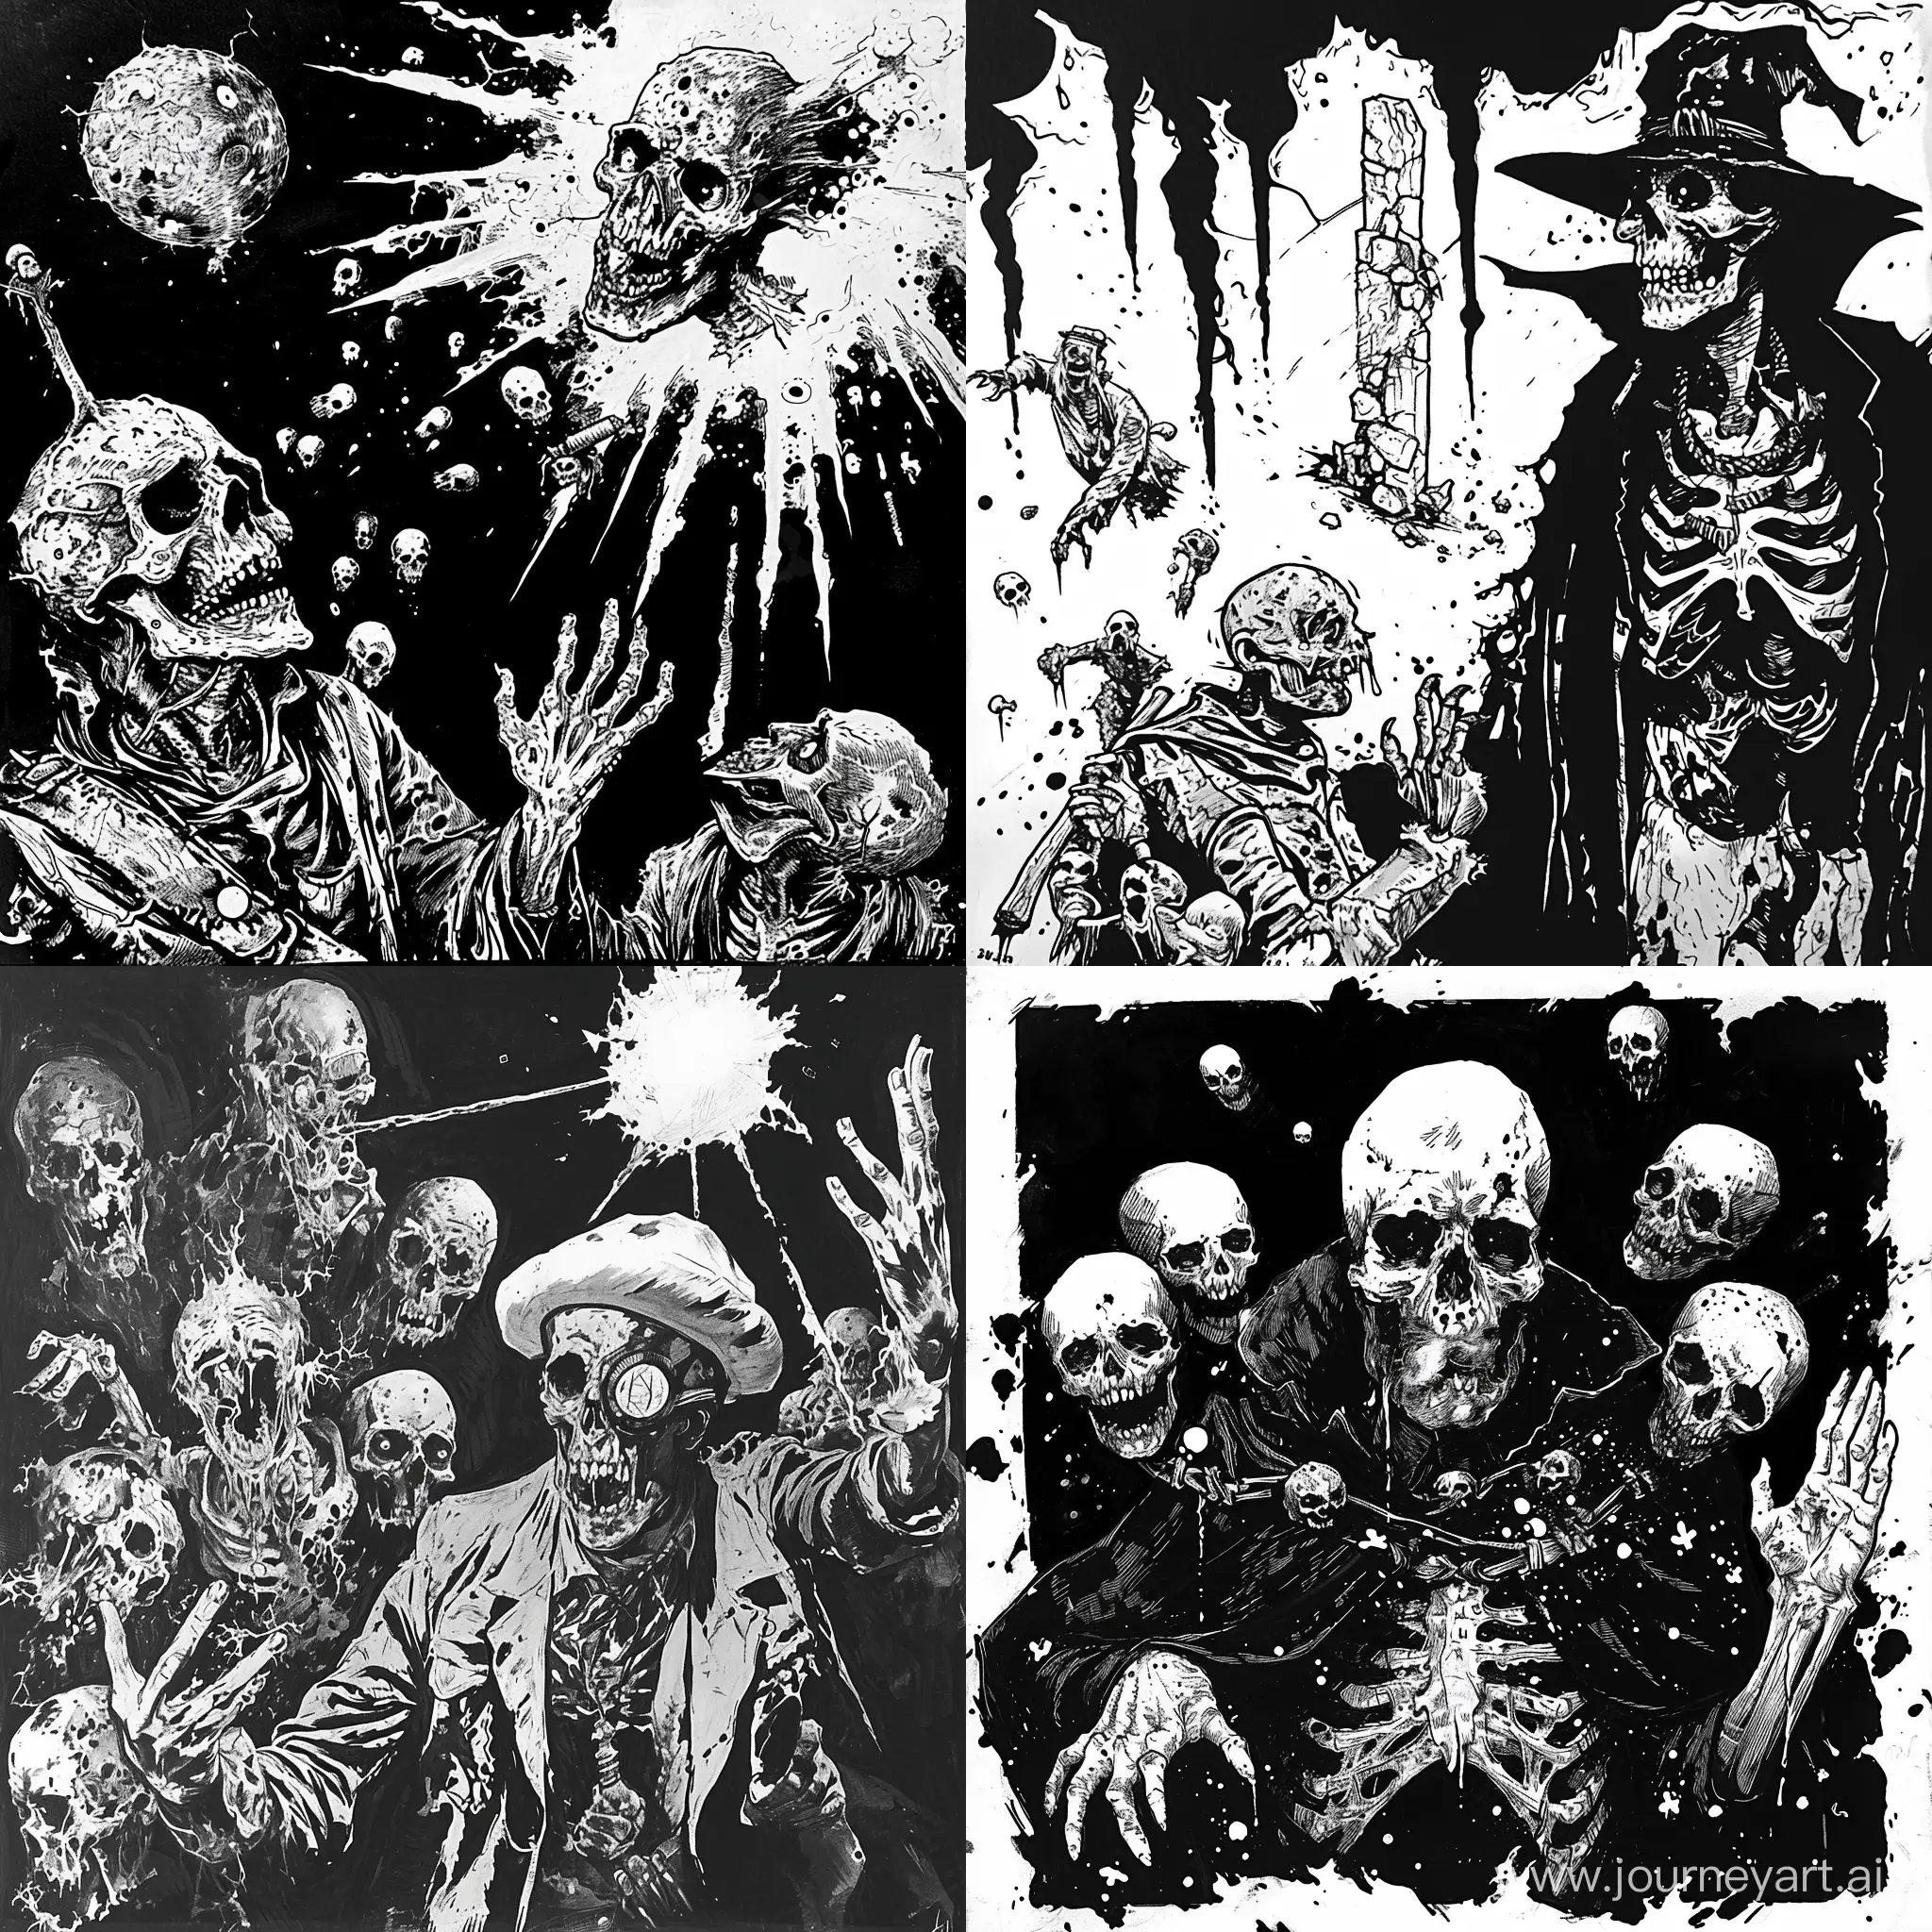 Rorschach test, black and white, necromancer raises undead from the grave